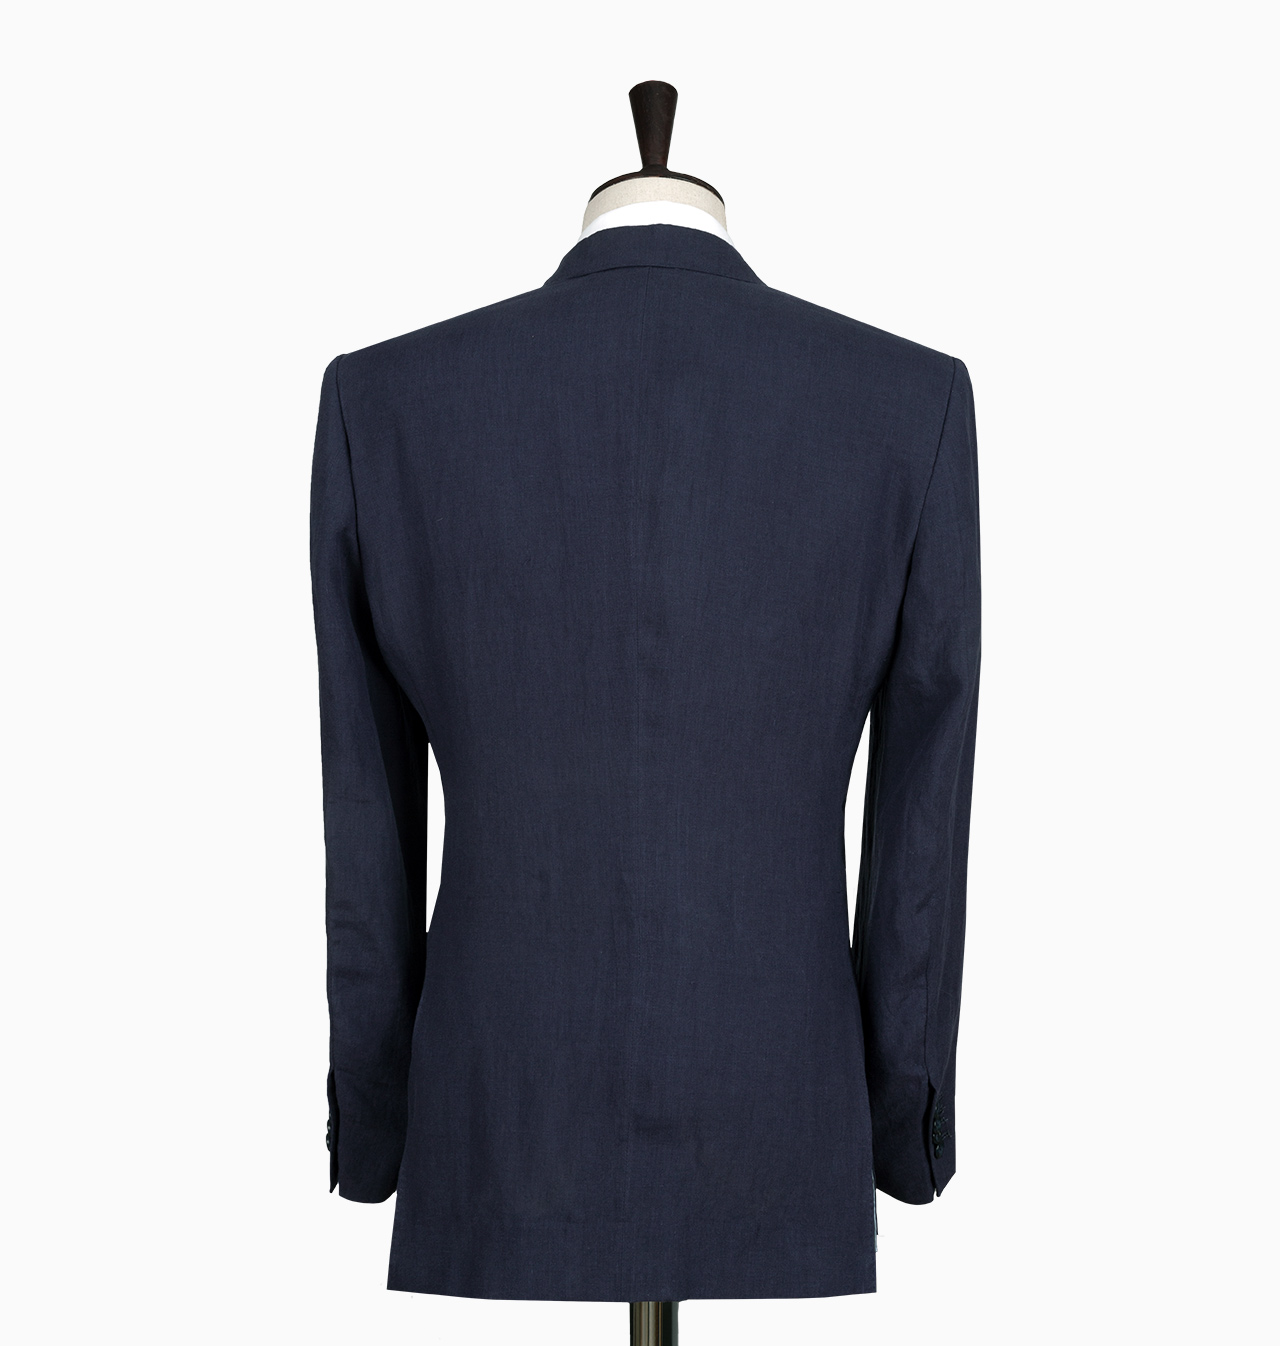 Bright Navy Linen / S1620 - Suiting